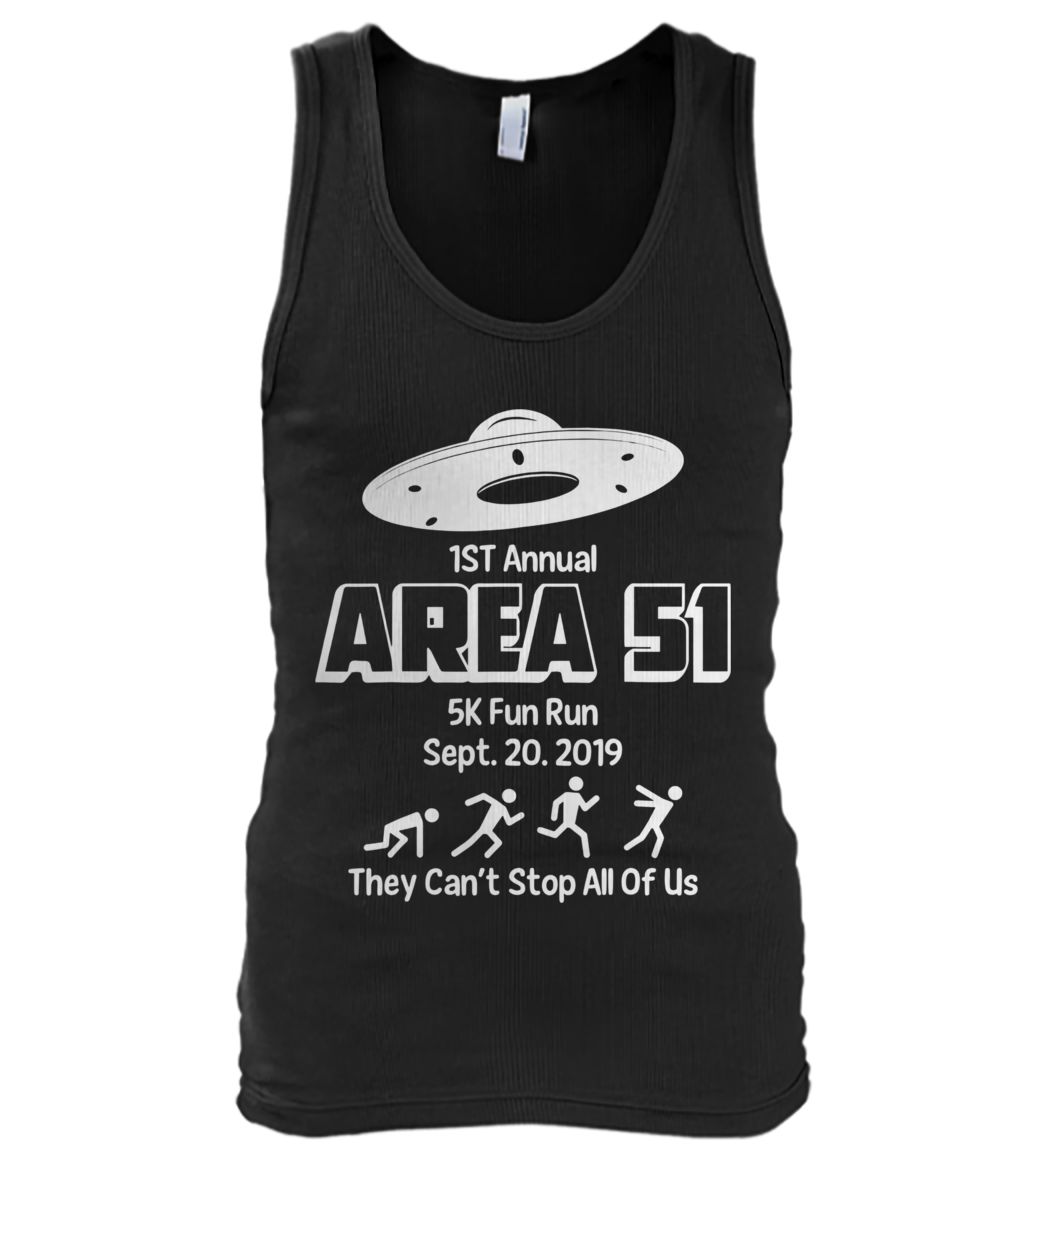 1st annual area 51 5k fun run september 2019 they can't stop all of us men's tank top